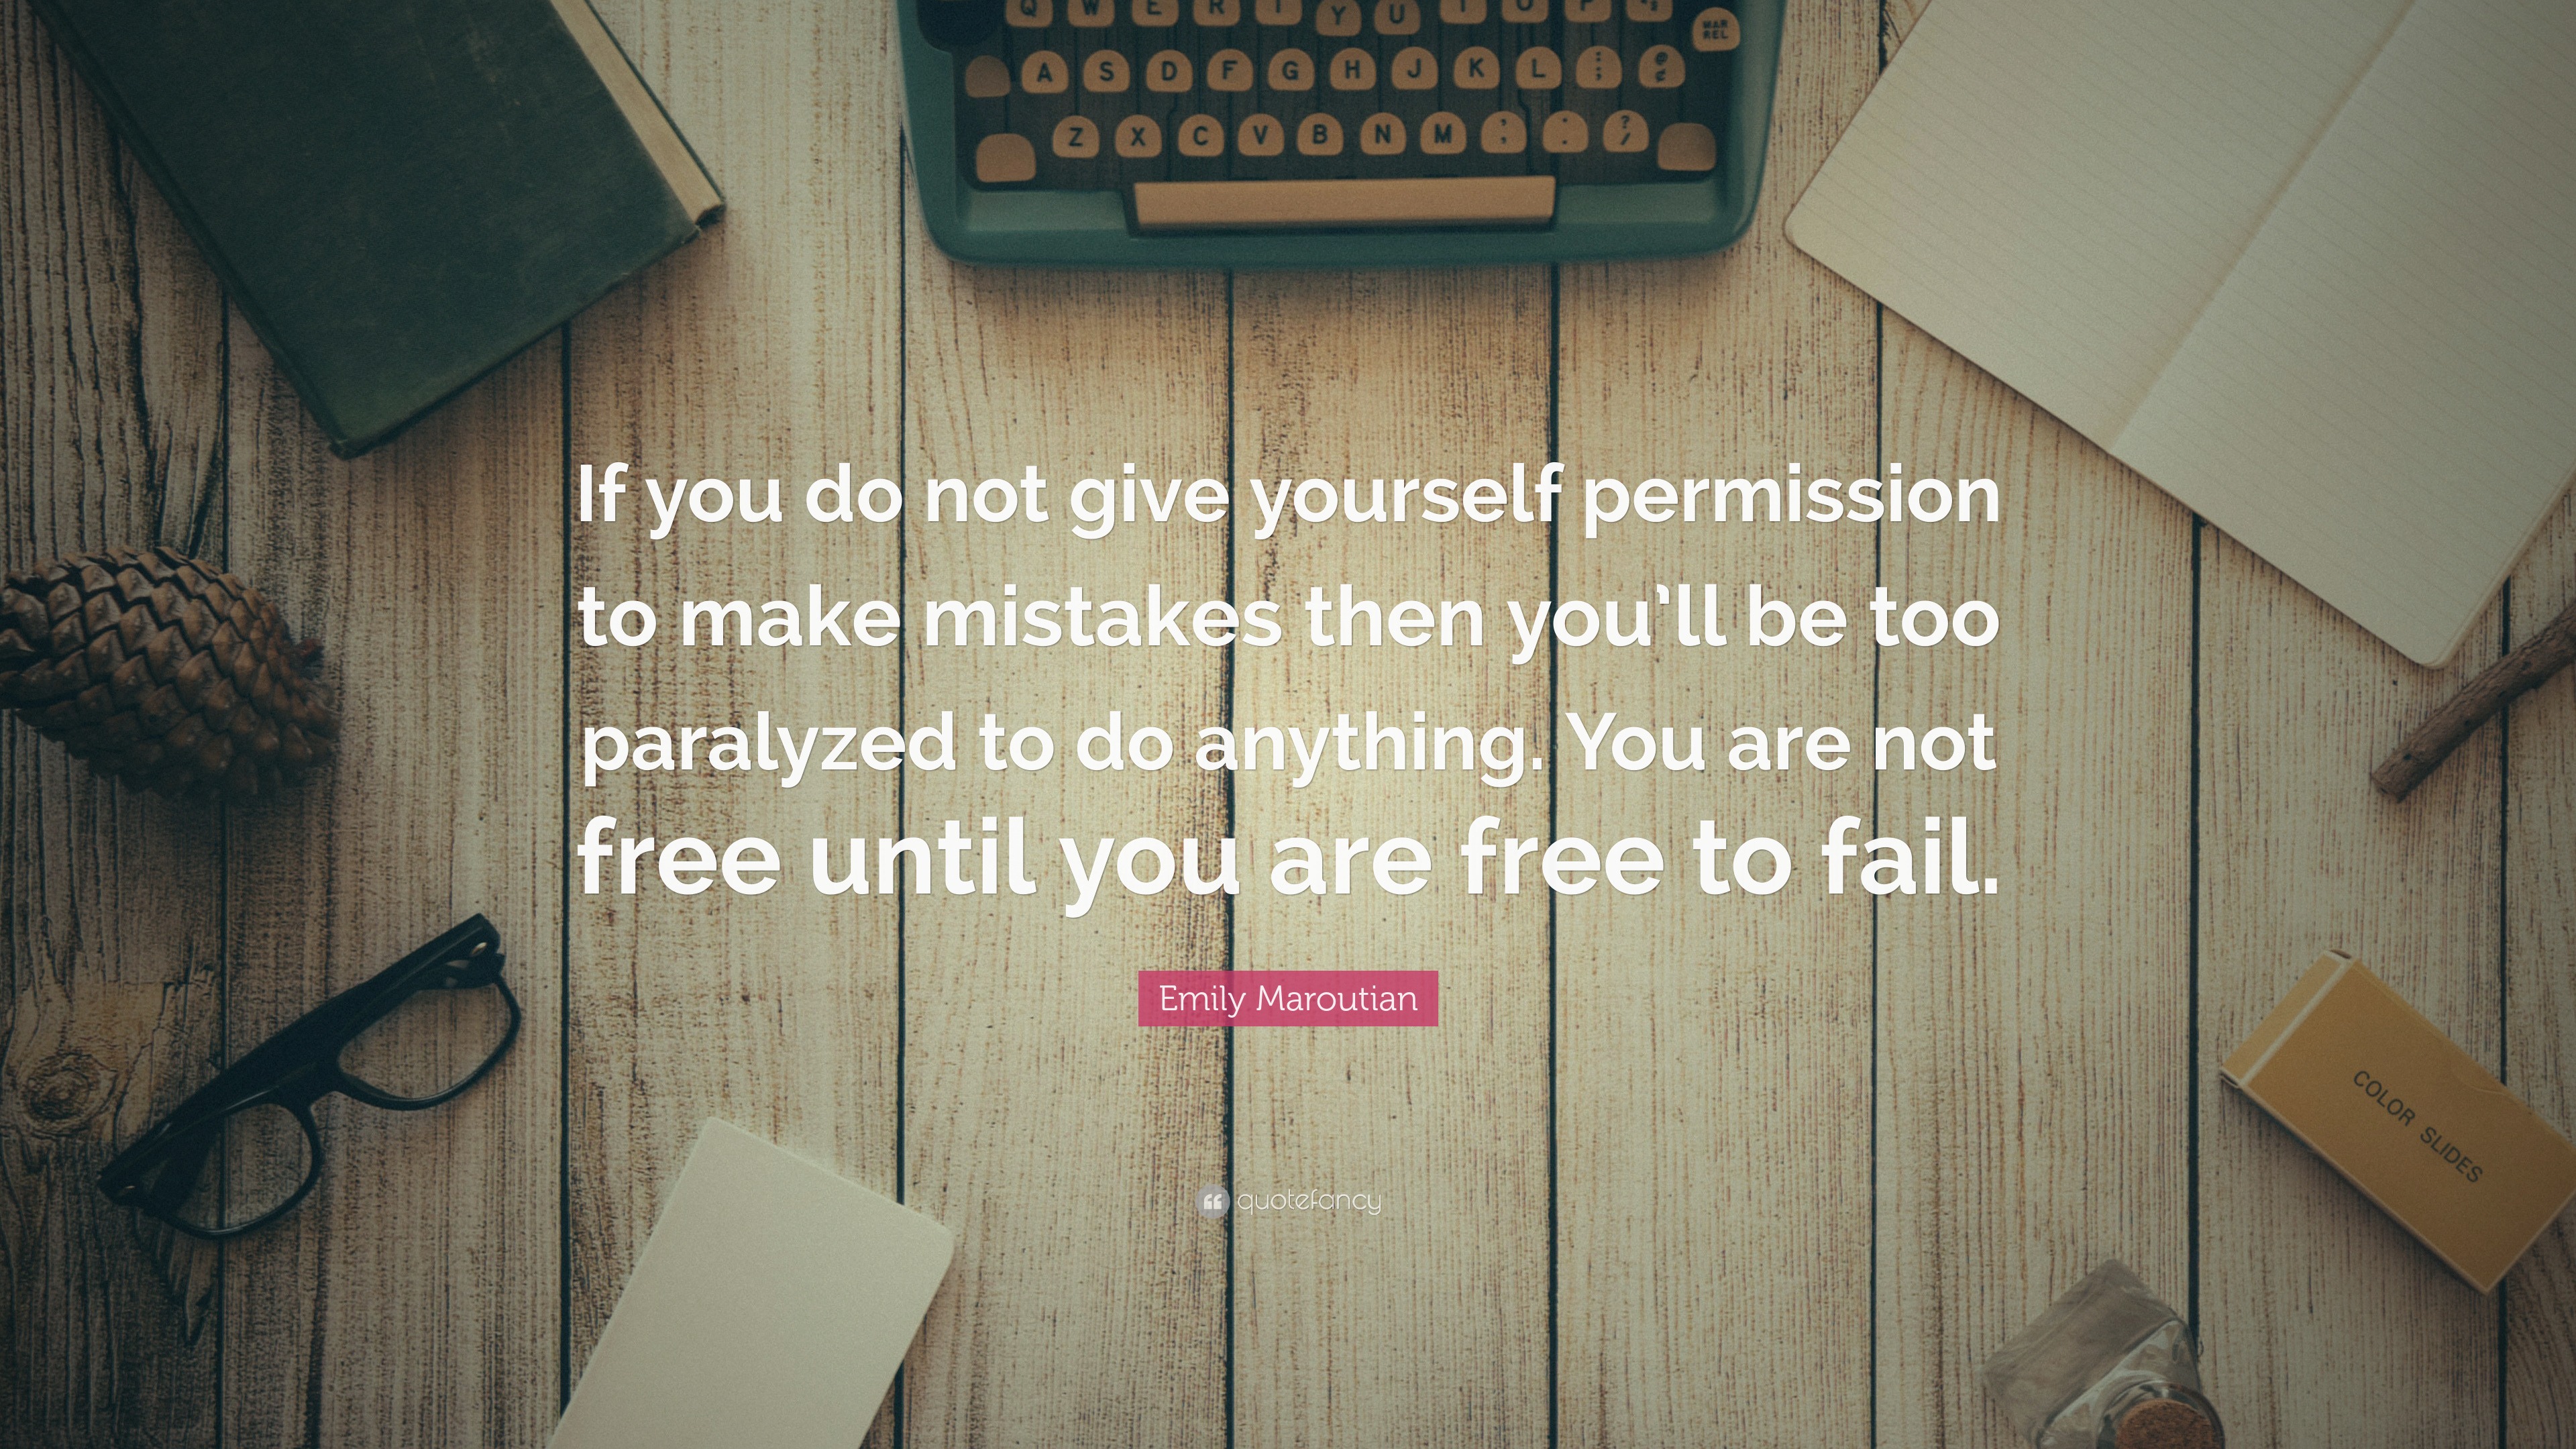 GIVE YOURSELF PERMISSION TO DO THE THINGS YOU ENJOY - The Blurt Foundation